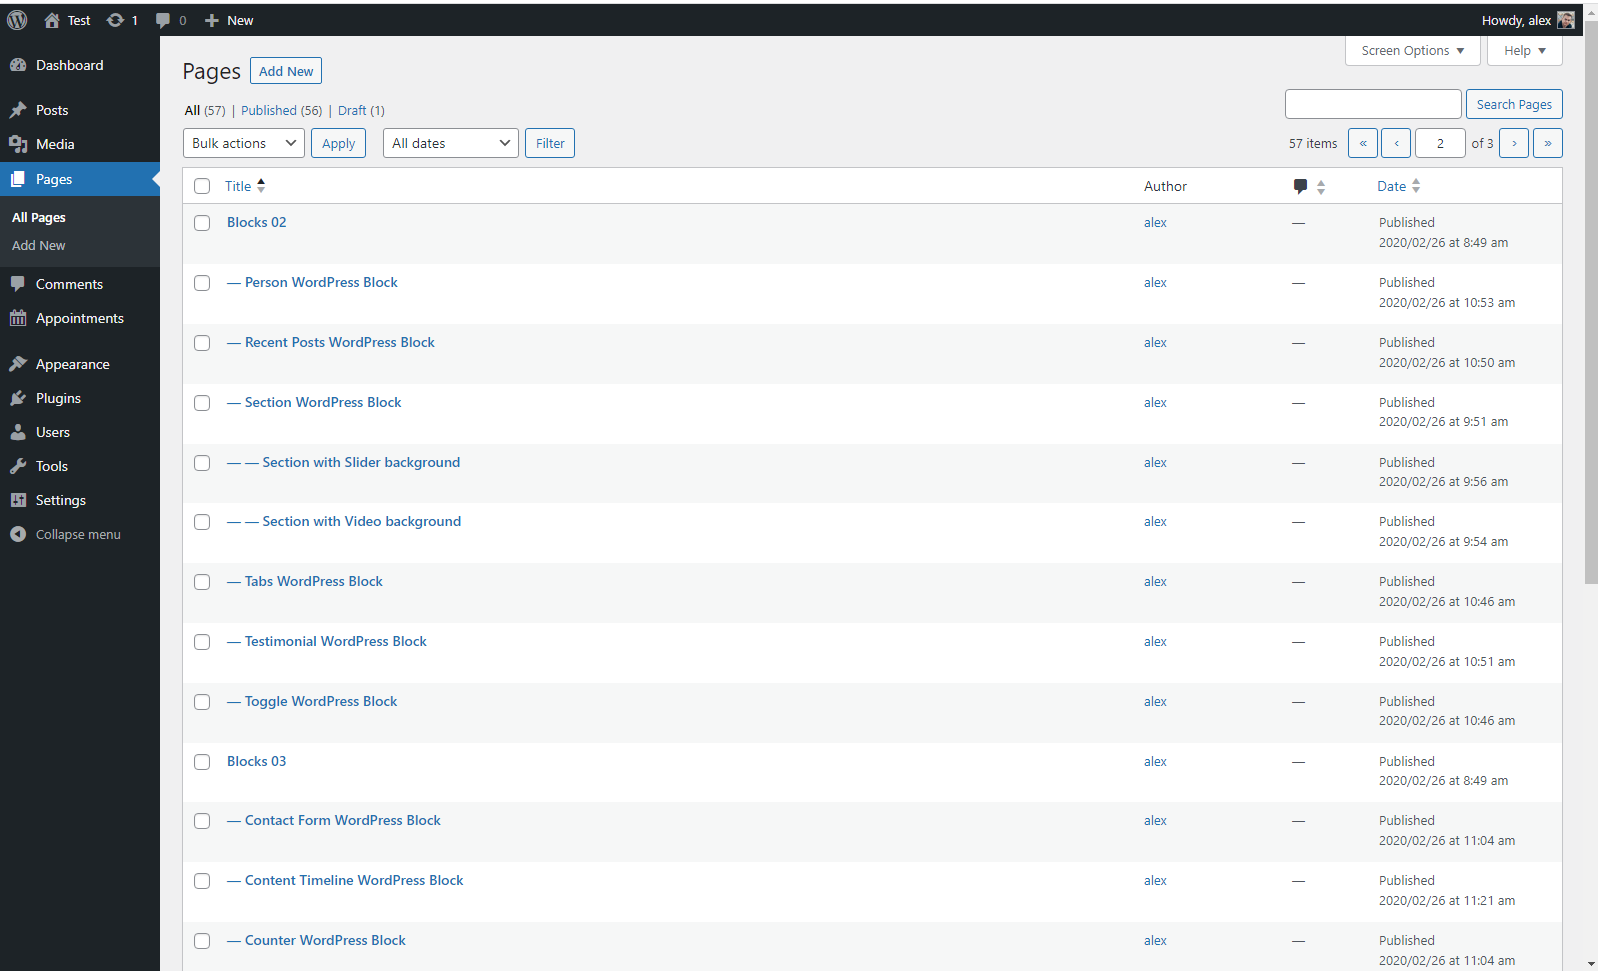 Snapshot showing the list of pages and blocks imported into the Lorenty theme during the initial setup.